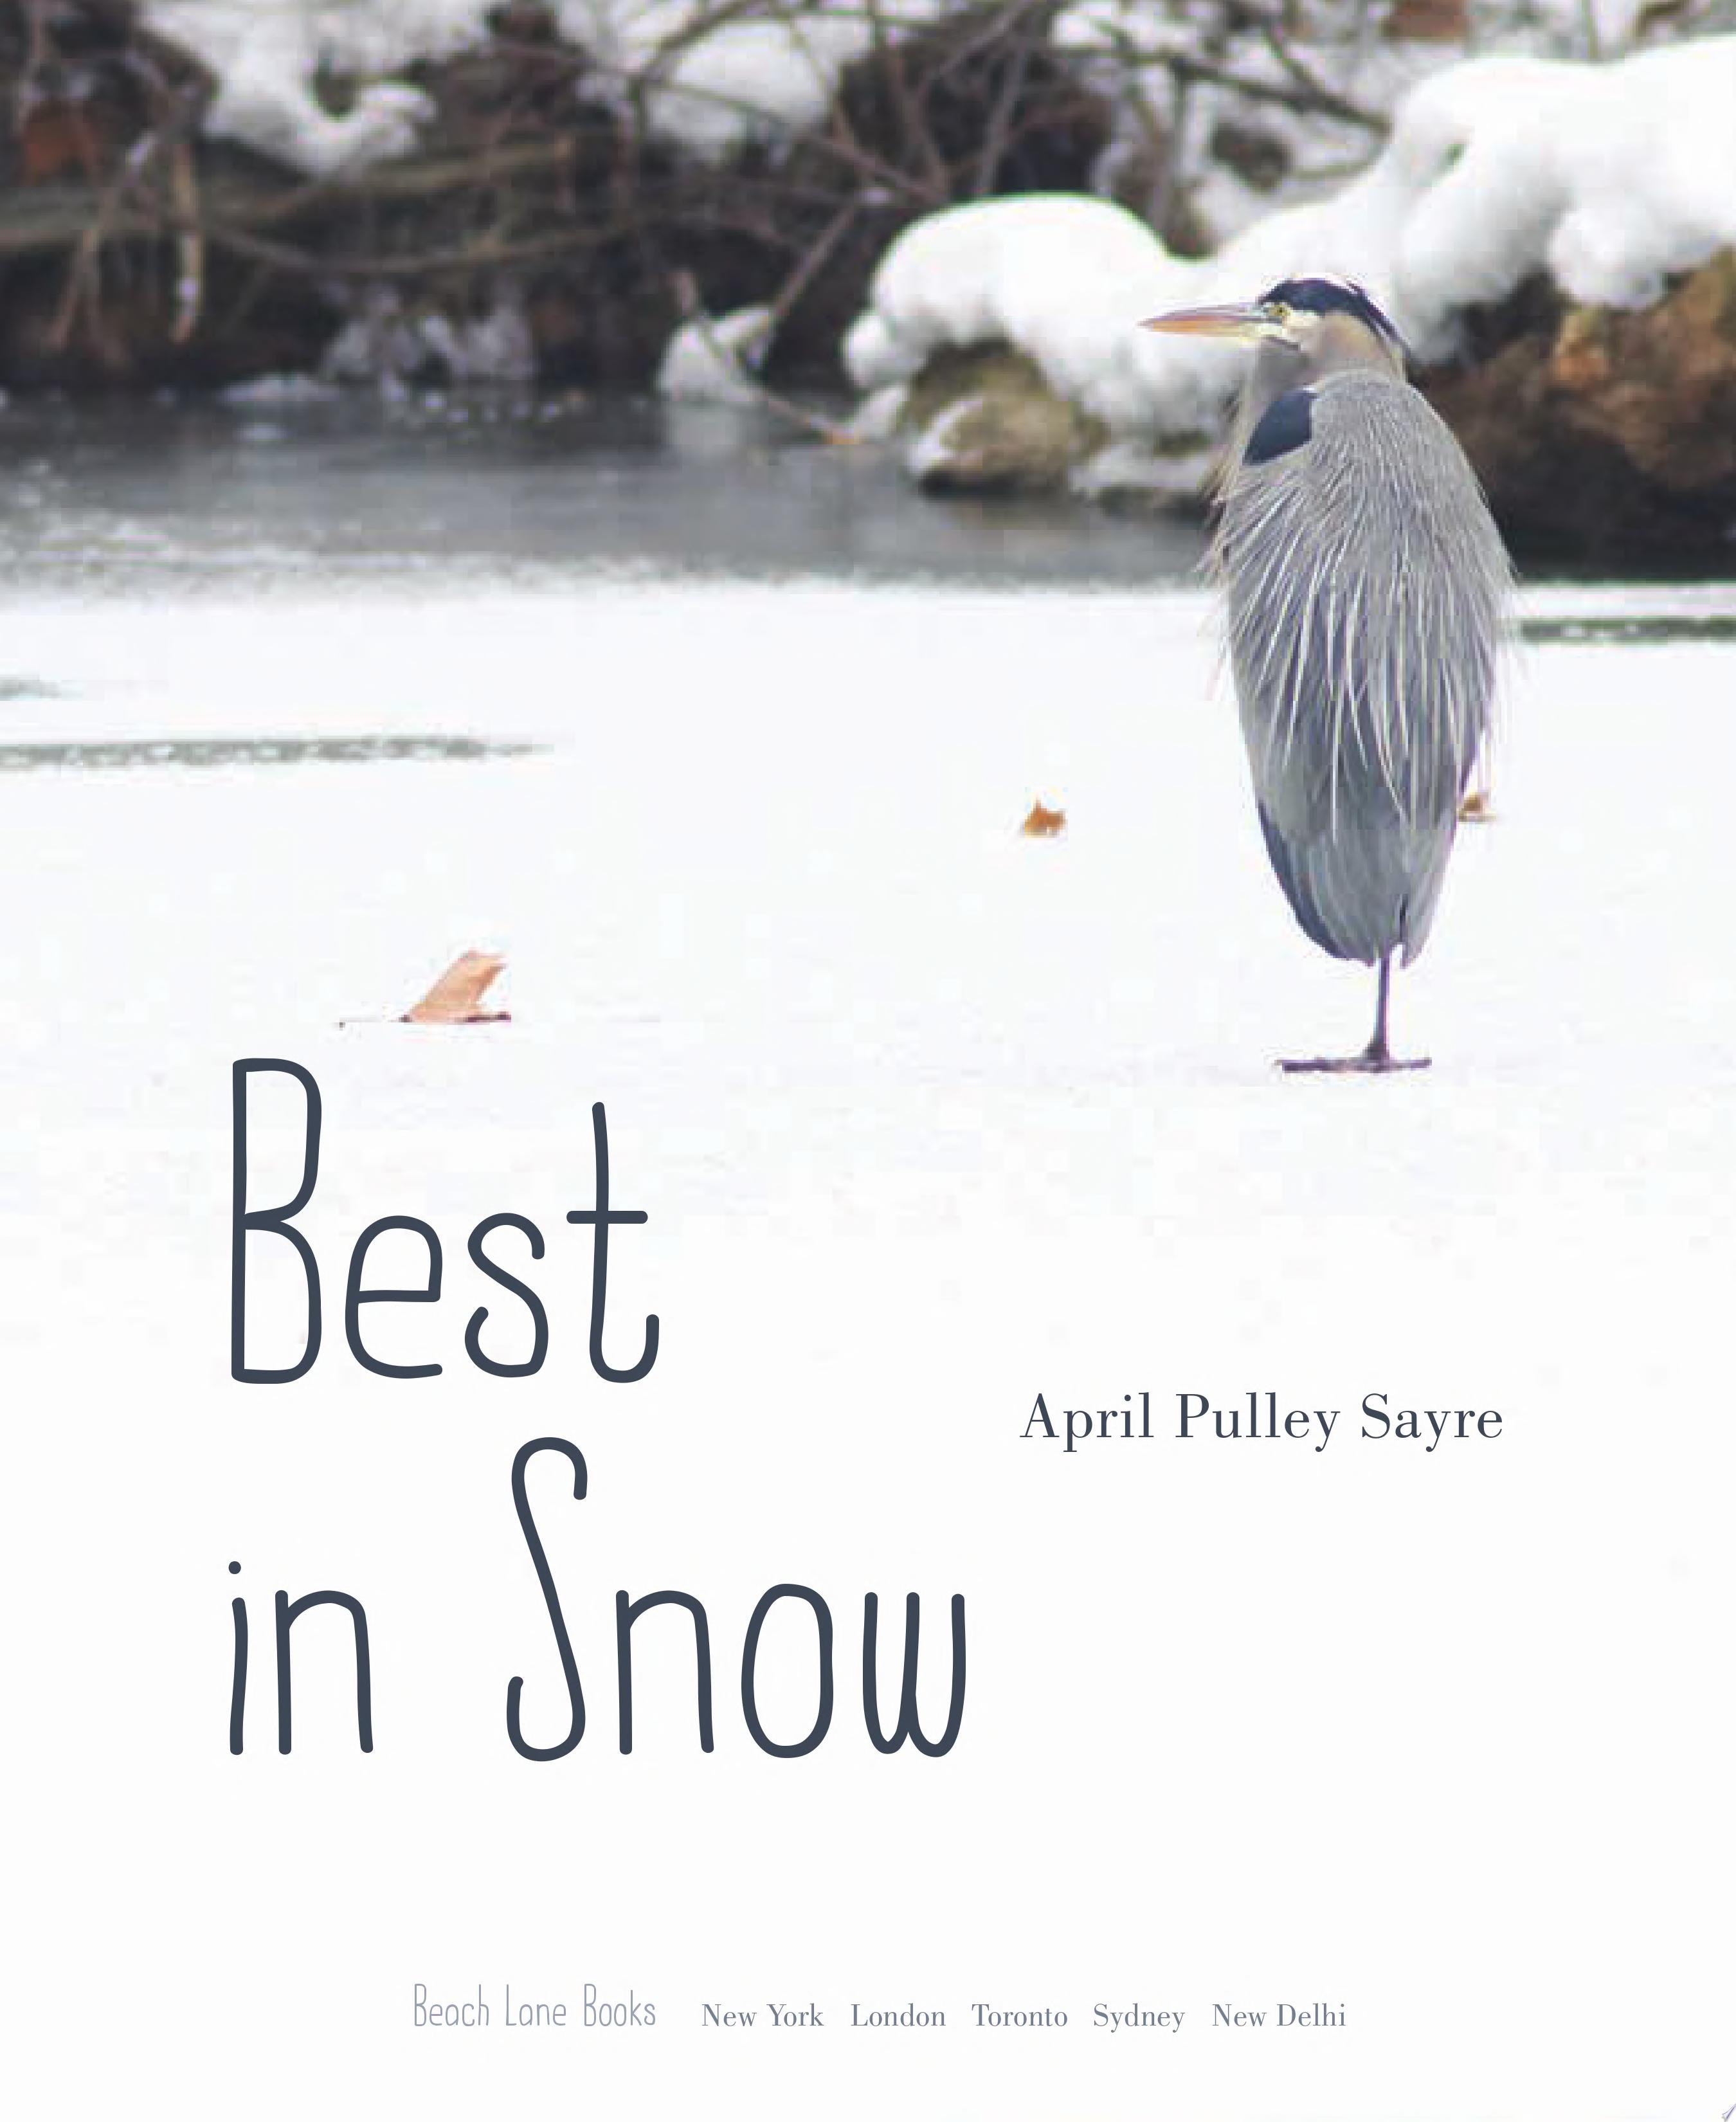 Image for "Best in Snow"